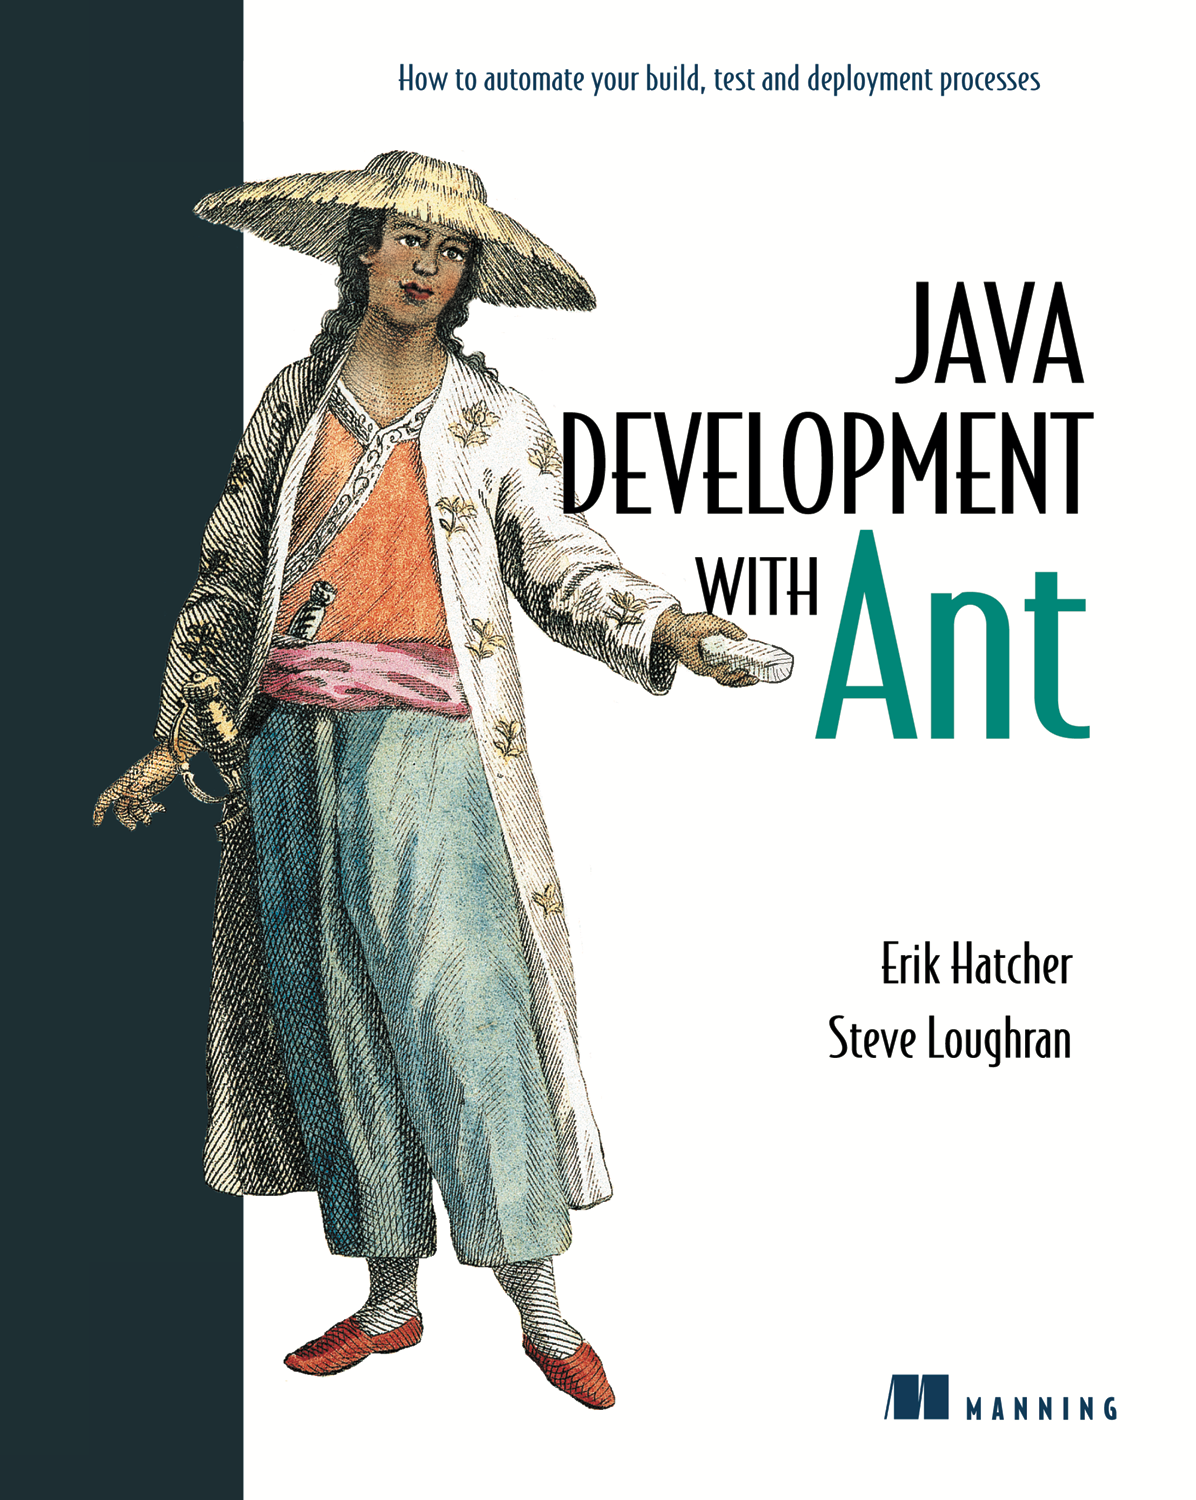 Java Development with Ant by Erik Hatcher and Steve Loughran